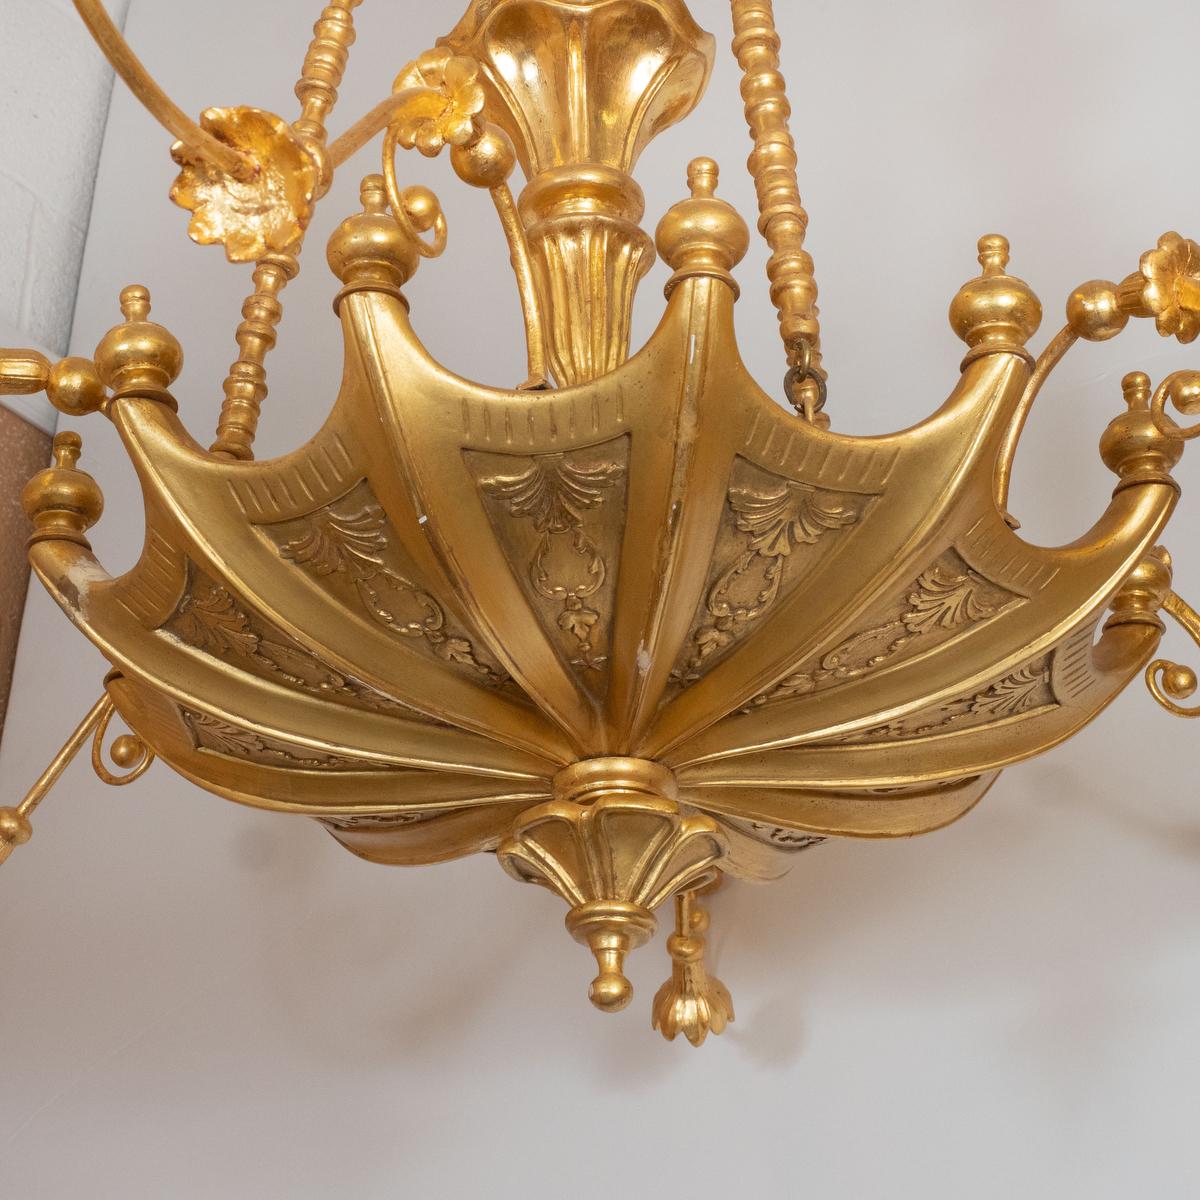 Giltwood Umbrella Motif Chandelier by Carlos Villegas In Excellent Condition For Sale In Tarrytown, NY